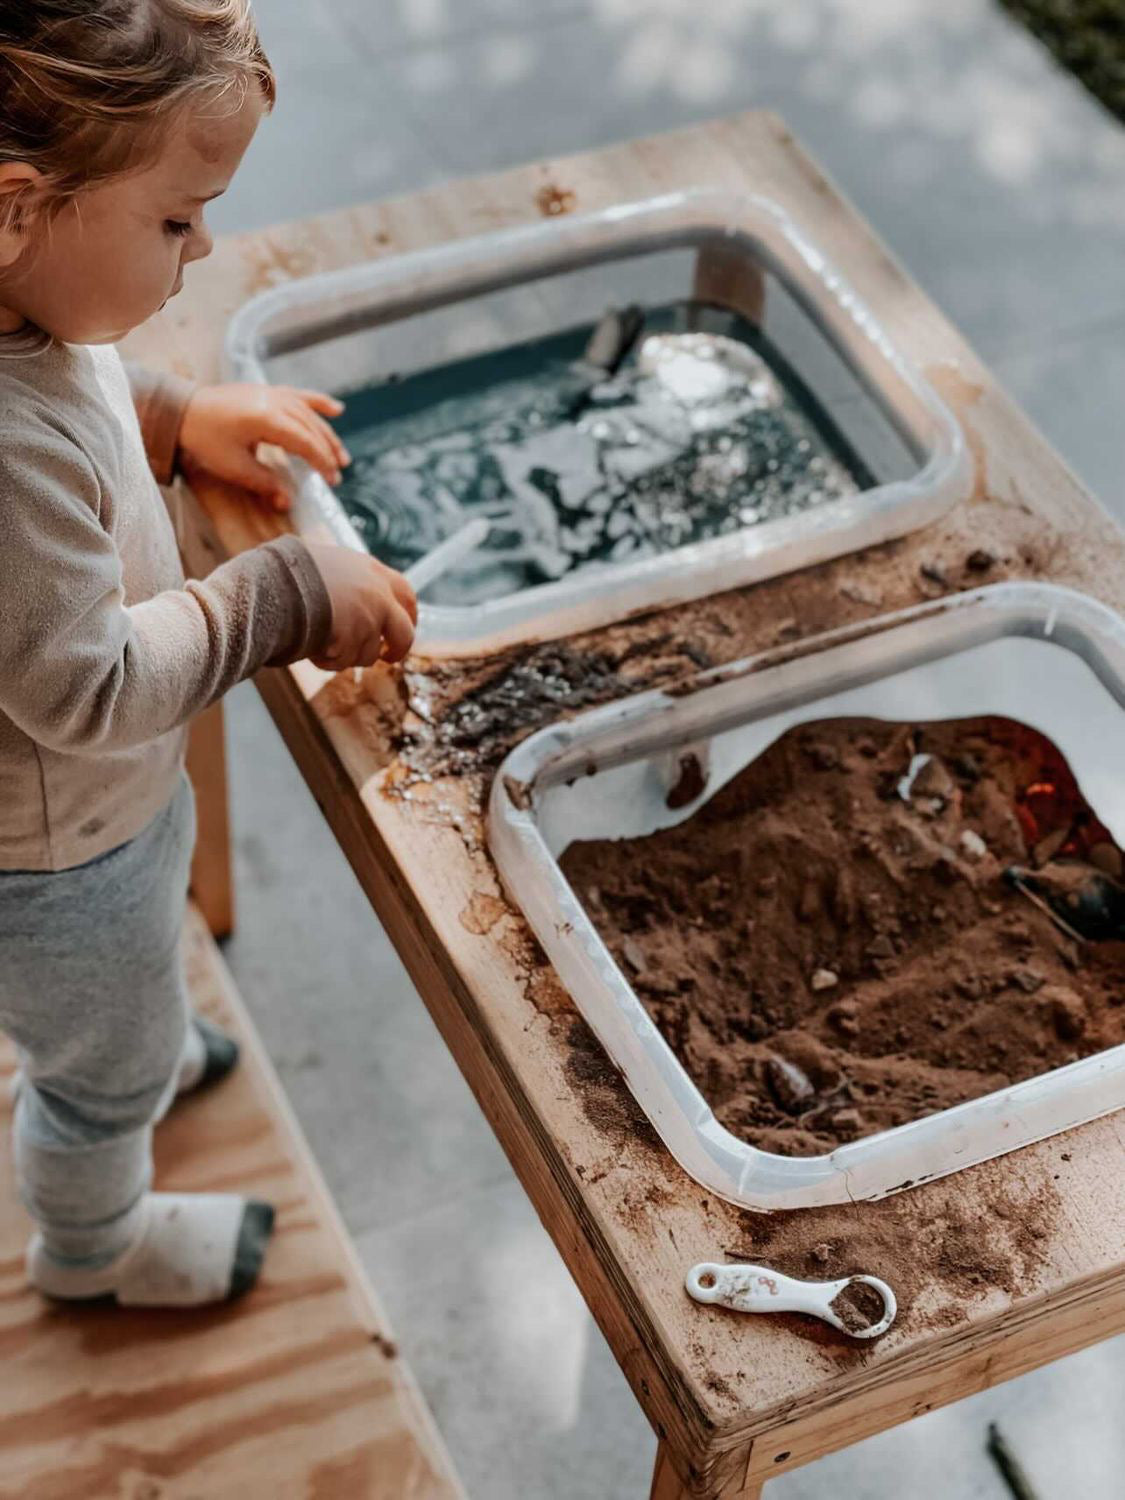 Wooden Sensory Table and Lid with mud and water messy play